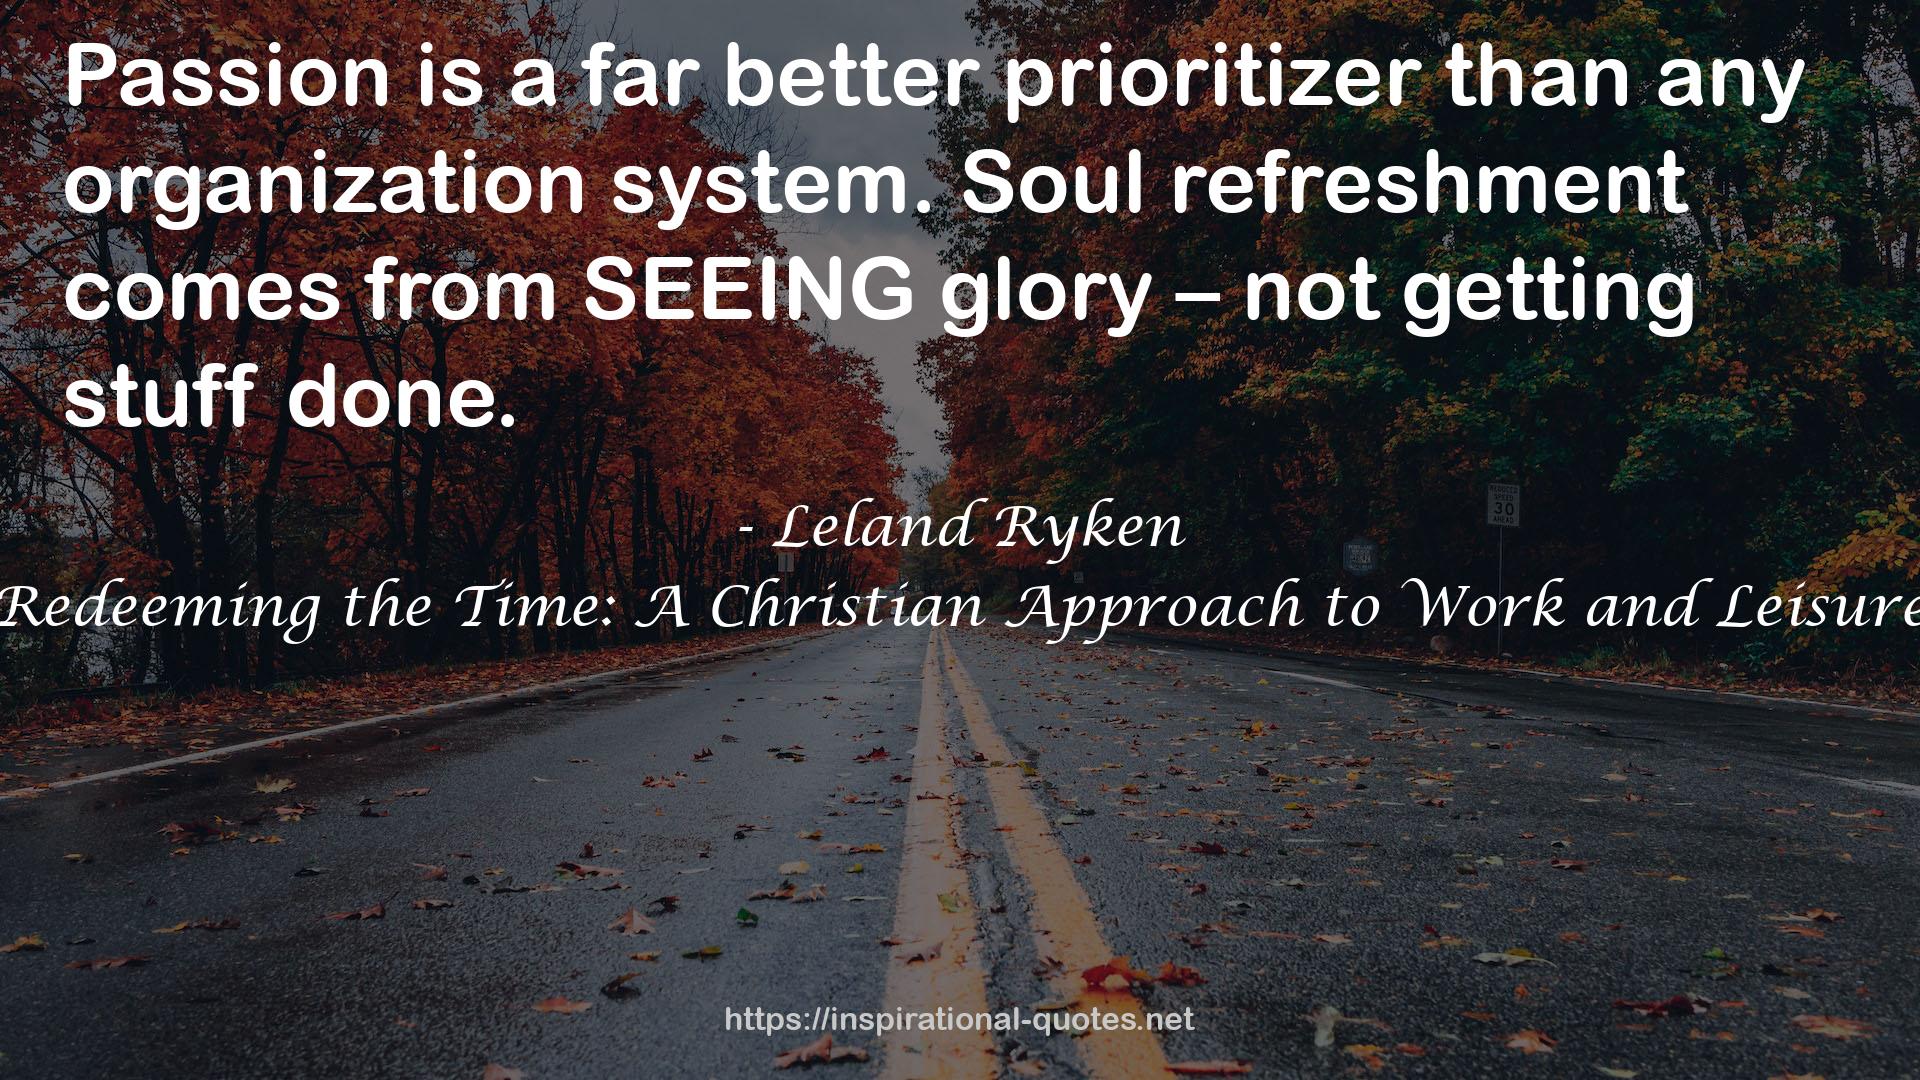 Redeeming the Time: A Christian Approach to Work and Leisure QUOTES